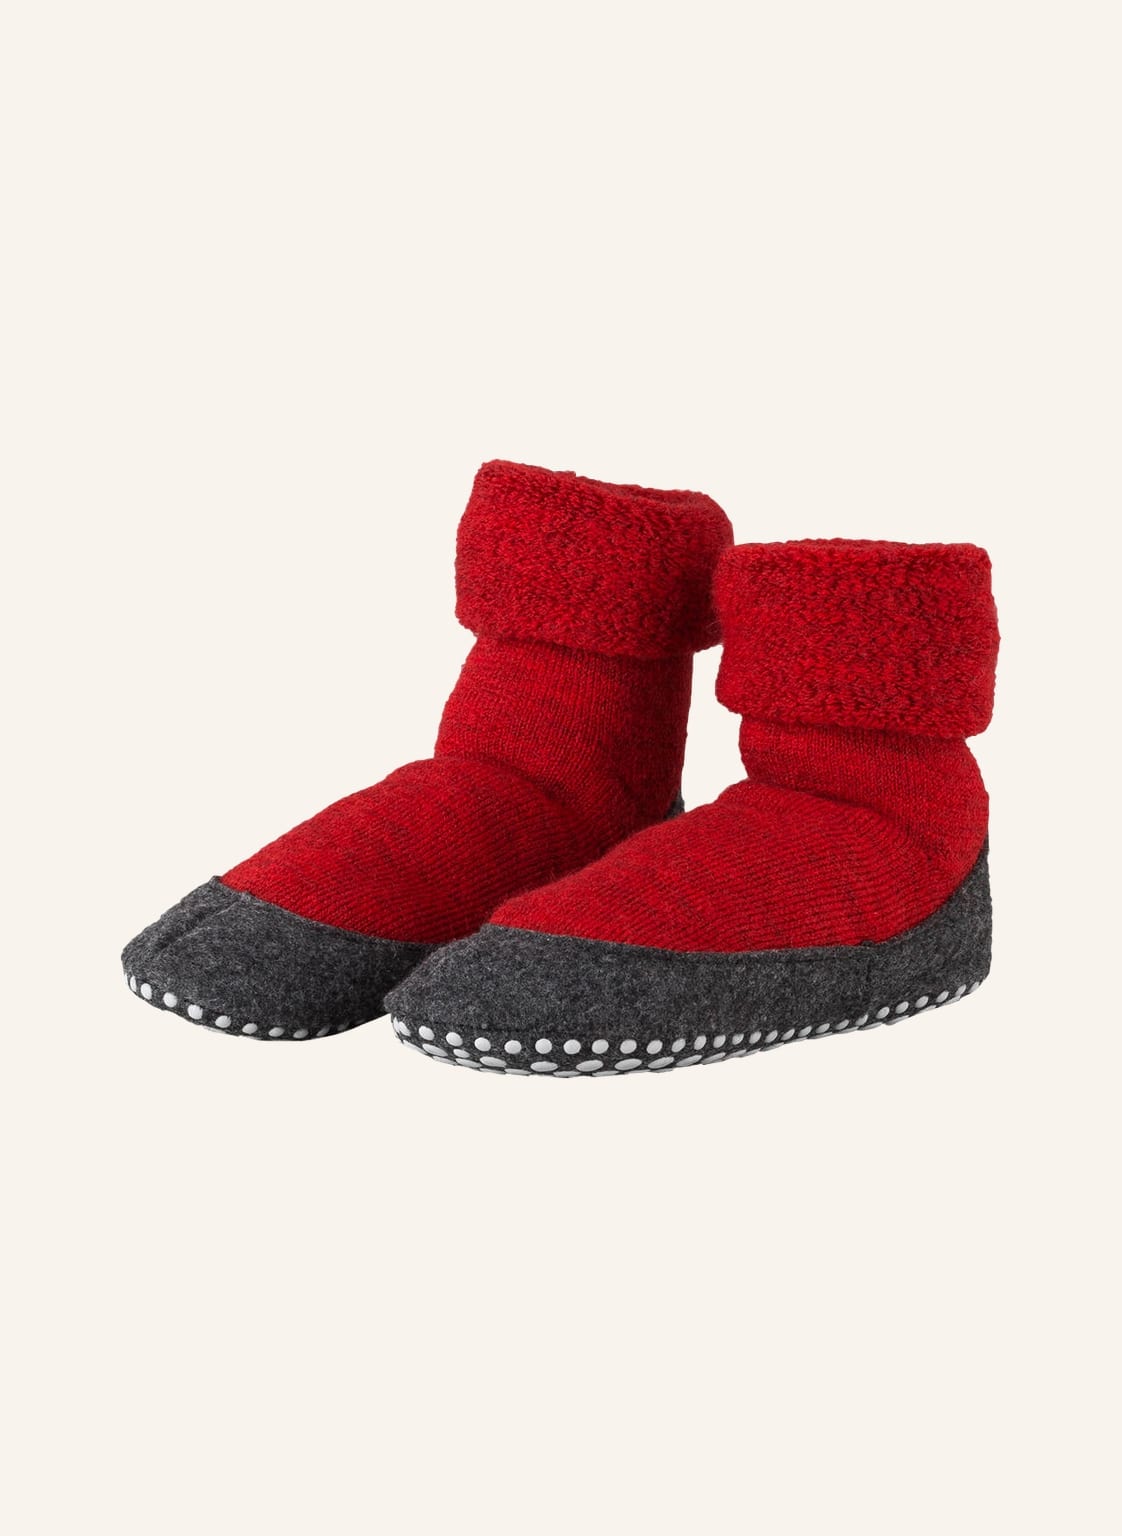 Image of Falke Stoppersocken Cosyshoes rot